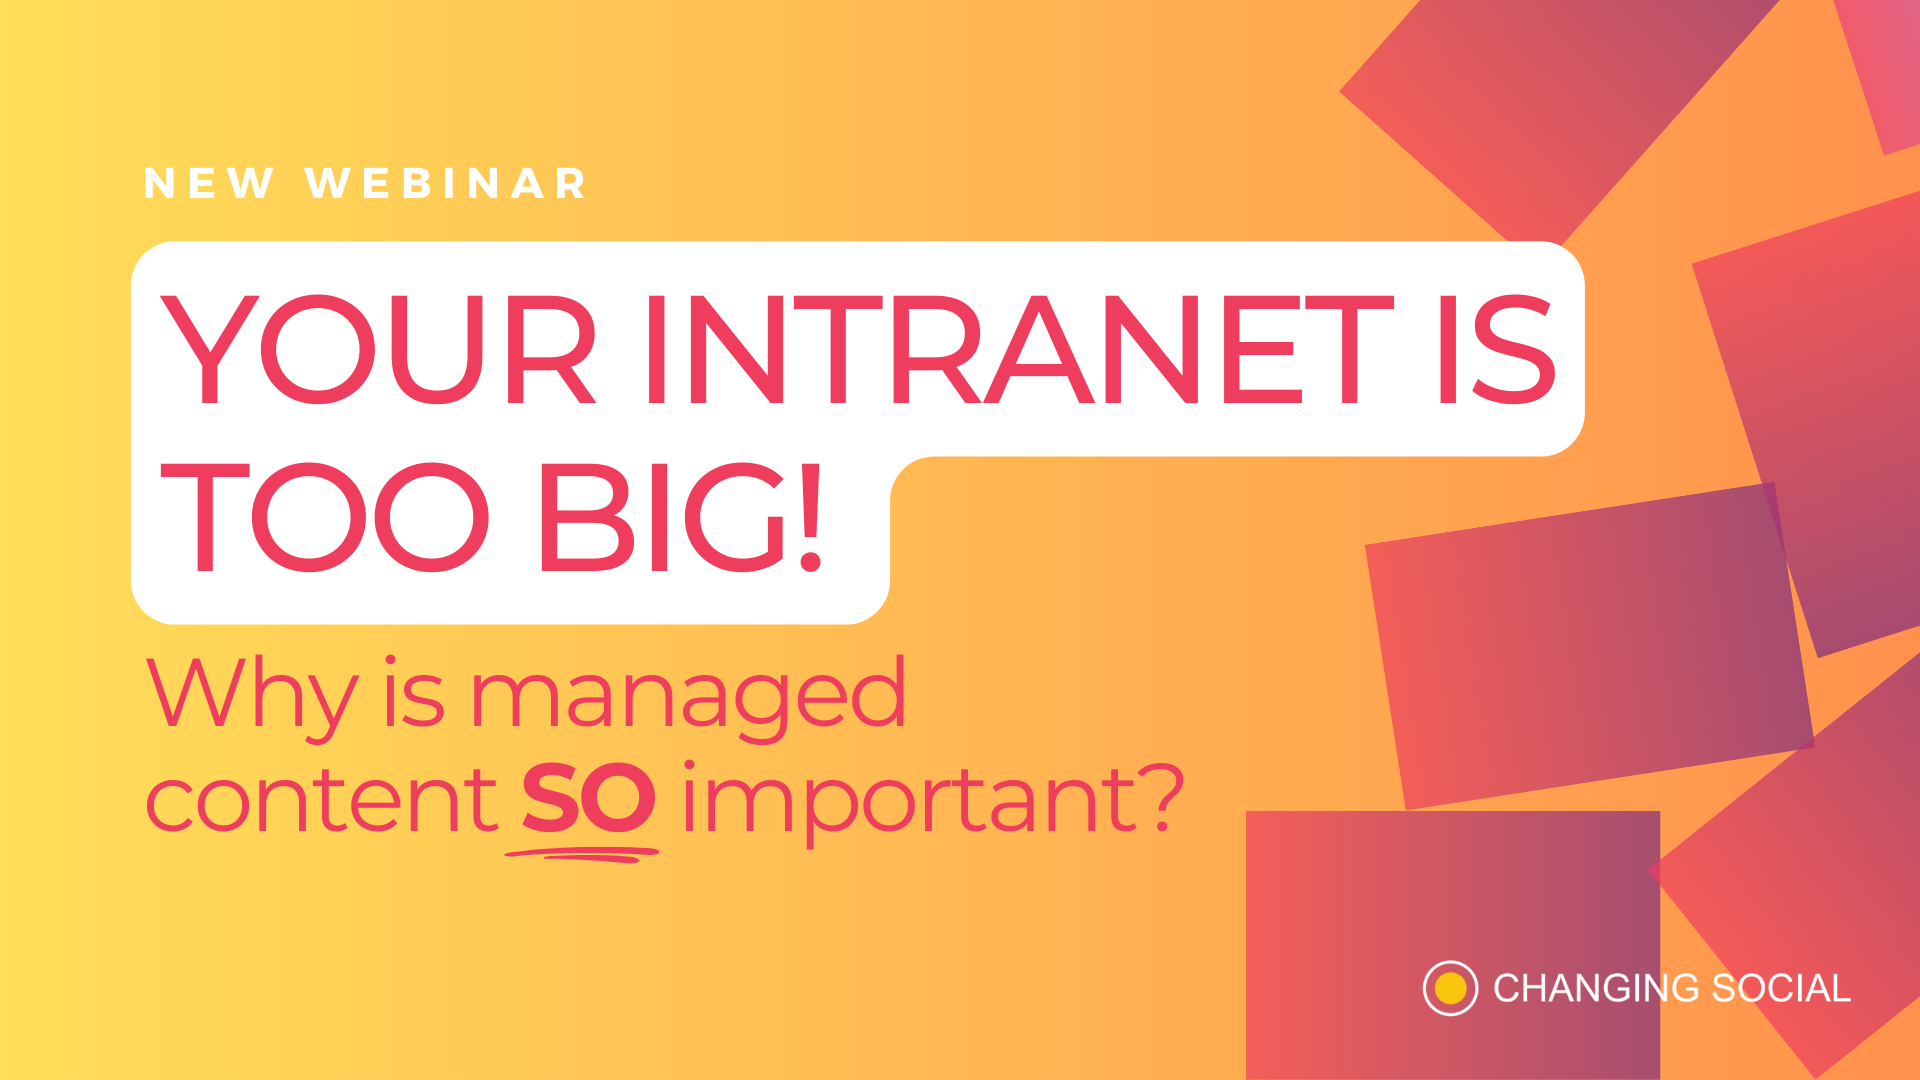 A promotional graphic for a Changing Social webinar titled "YOUR INTRANET IS TOO BIG!" discussing the importance of managed content, with an orange and yellow gradient background and red and pink squares.